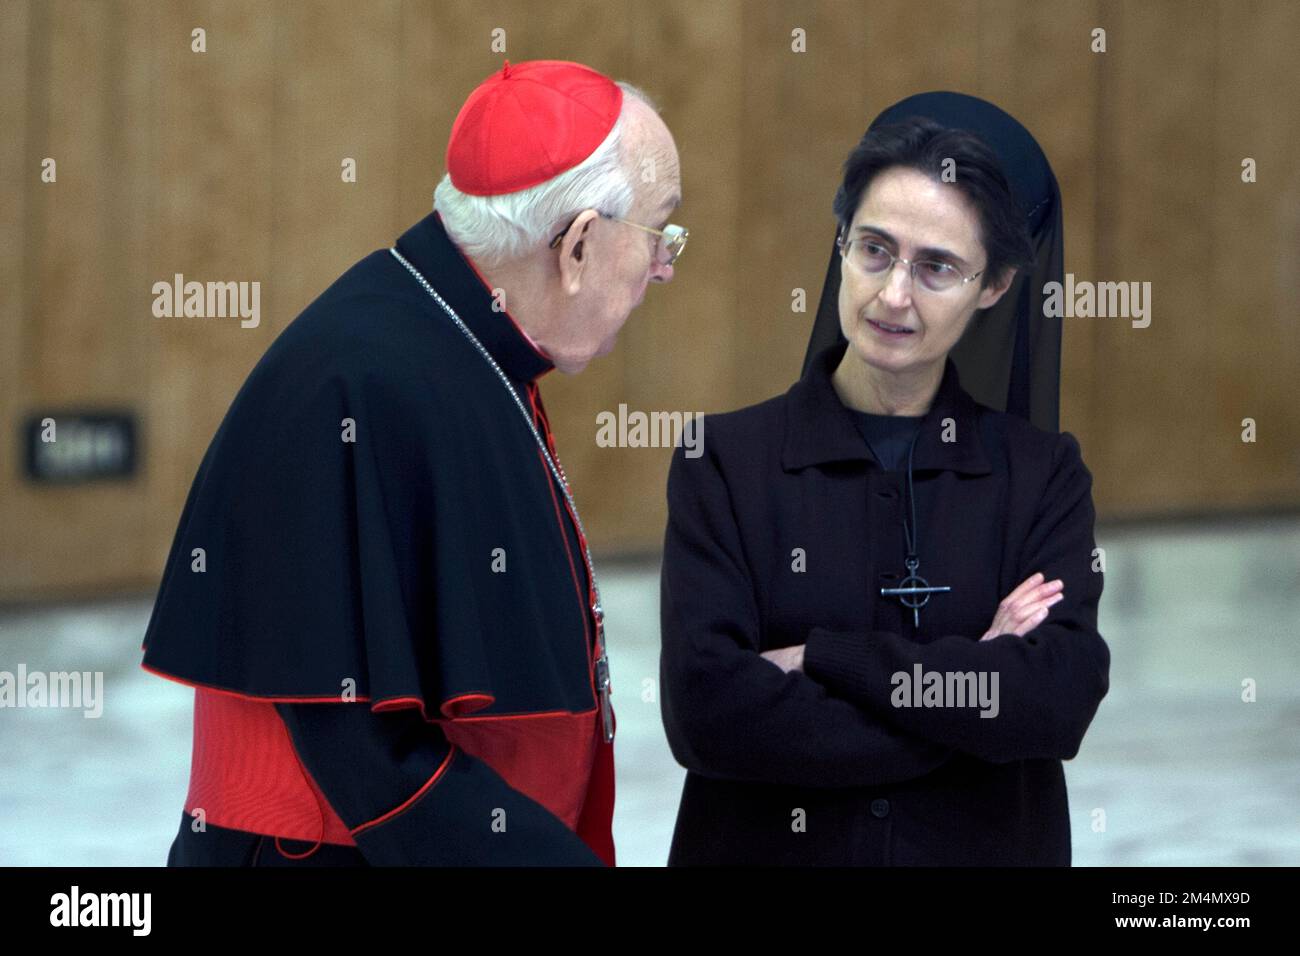 Vatican, Vatican. 22nd Nov, 2022. Italy, Rome, Vatican, 22/12/21 Cardinal Fernando Vérgez Alzaga (L) president of the Governorate of Vatican City State with Sister Raffaella Petrini Secretary General during an audience with Vatican City State employees for the exchange of Christmas greetings, in the Paul VI Hall at the Vatican Photograph by Alessia Giuliani/Catholic Press Photo. RESTRICTED TO EDITORIAL USE - NO MARKETING - NO ADVERTISING CAMPAIGNS Credit: Independent Photo Agency/Alamy Live News Stock Photo